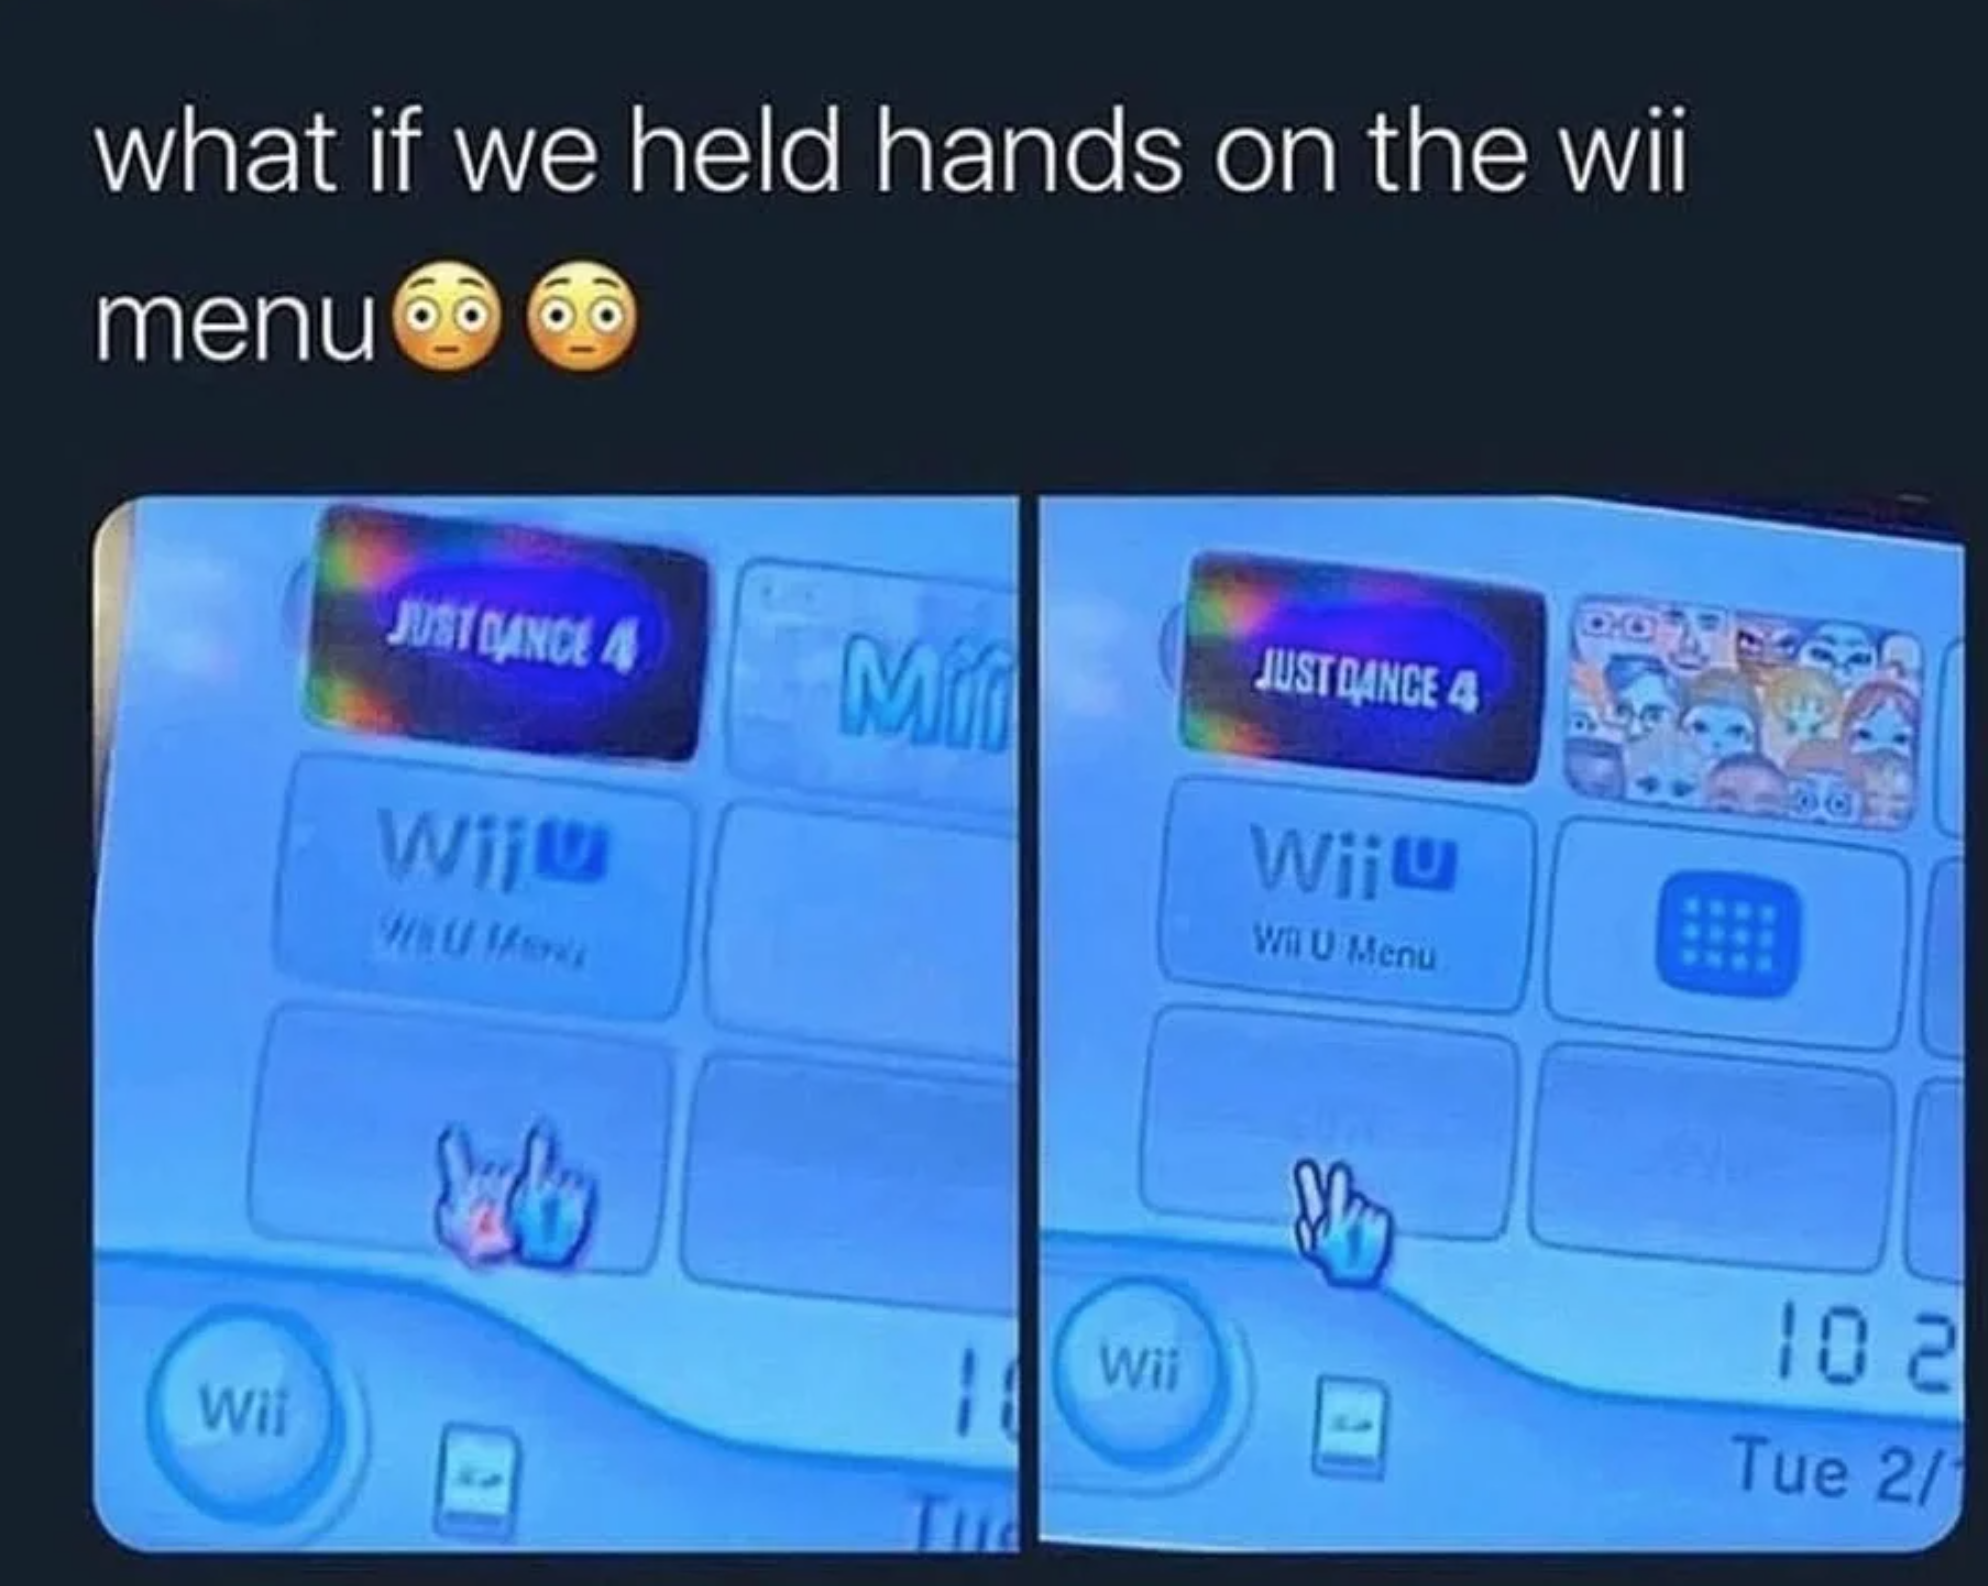 funny gaming memes - software - what if we held hands on the wii menu Just Dance A Me Justcance 4 Wiju Wii Wa U Menu Wil Wii 102 Tue 27